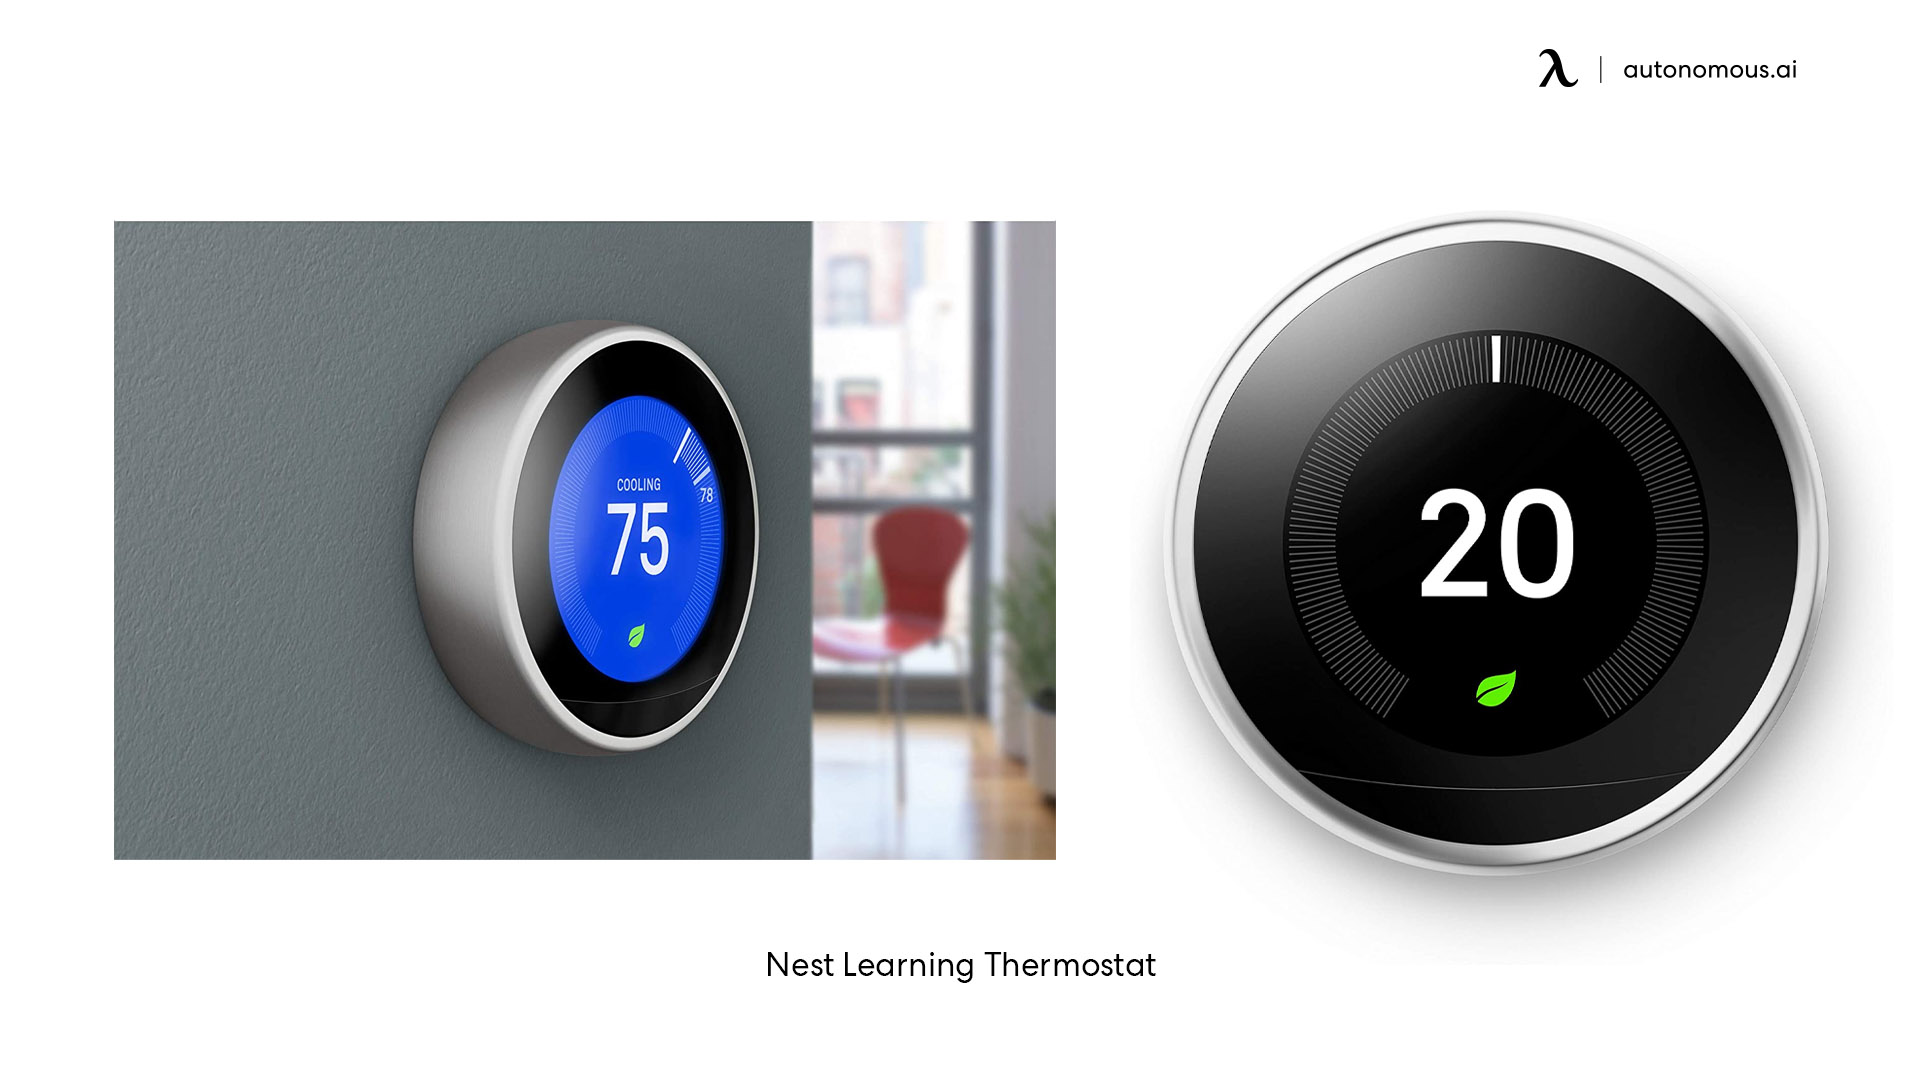 Smart Thermostat smart office devices